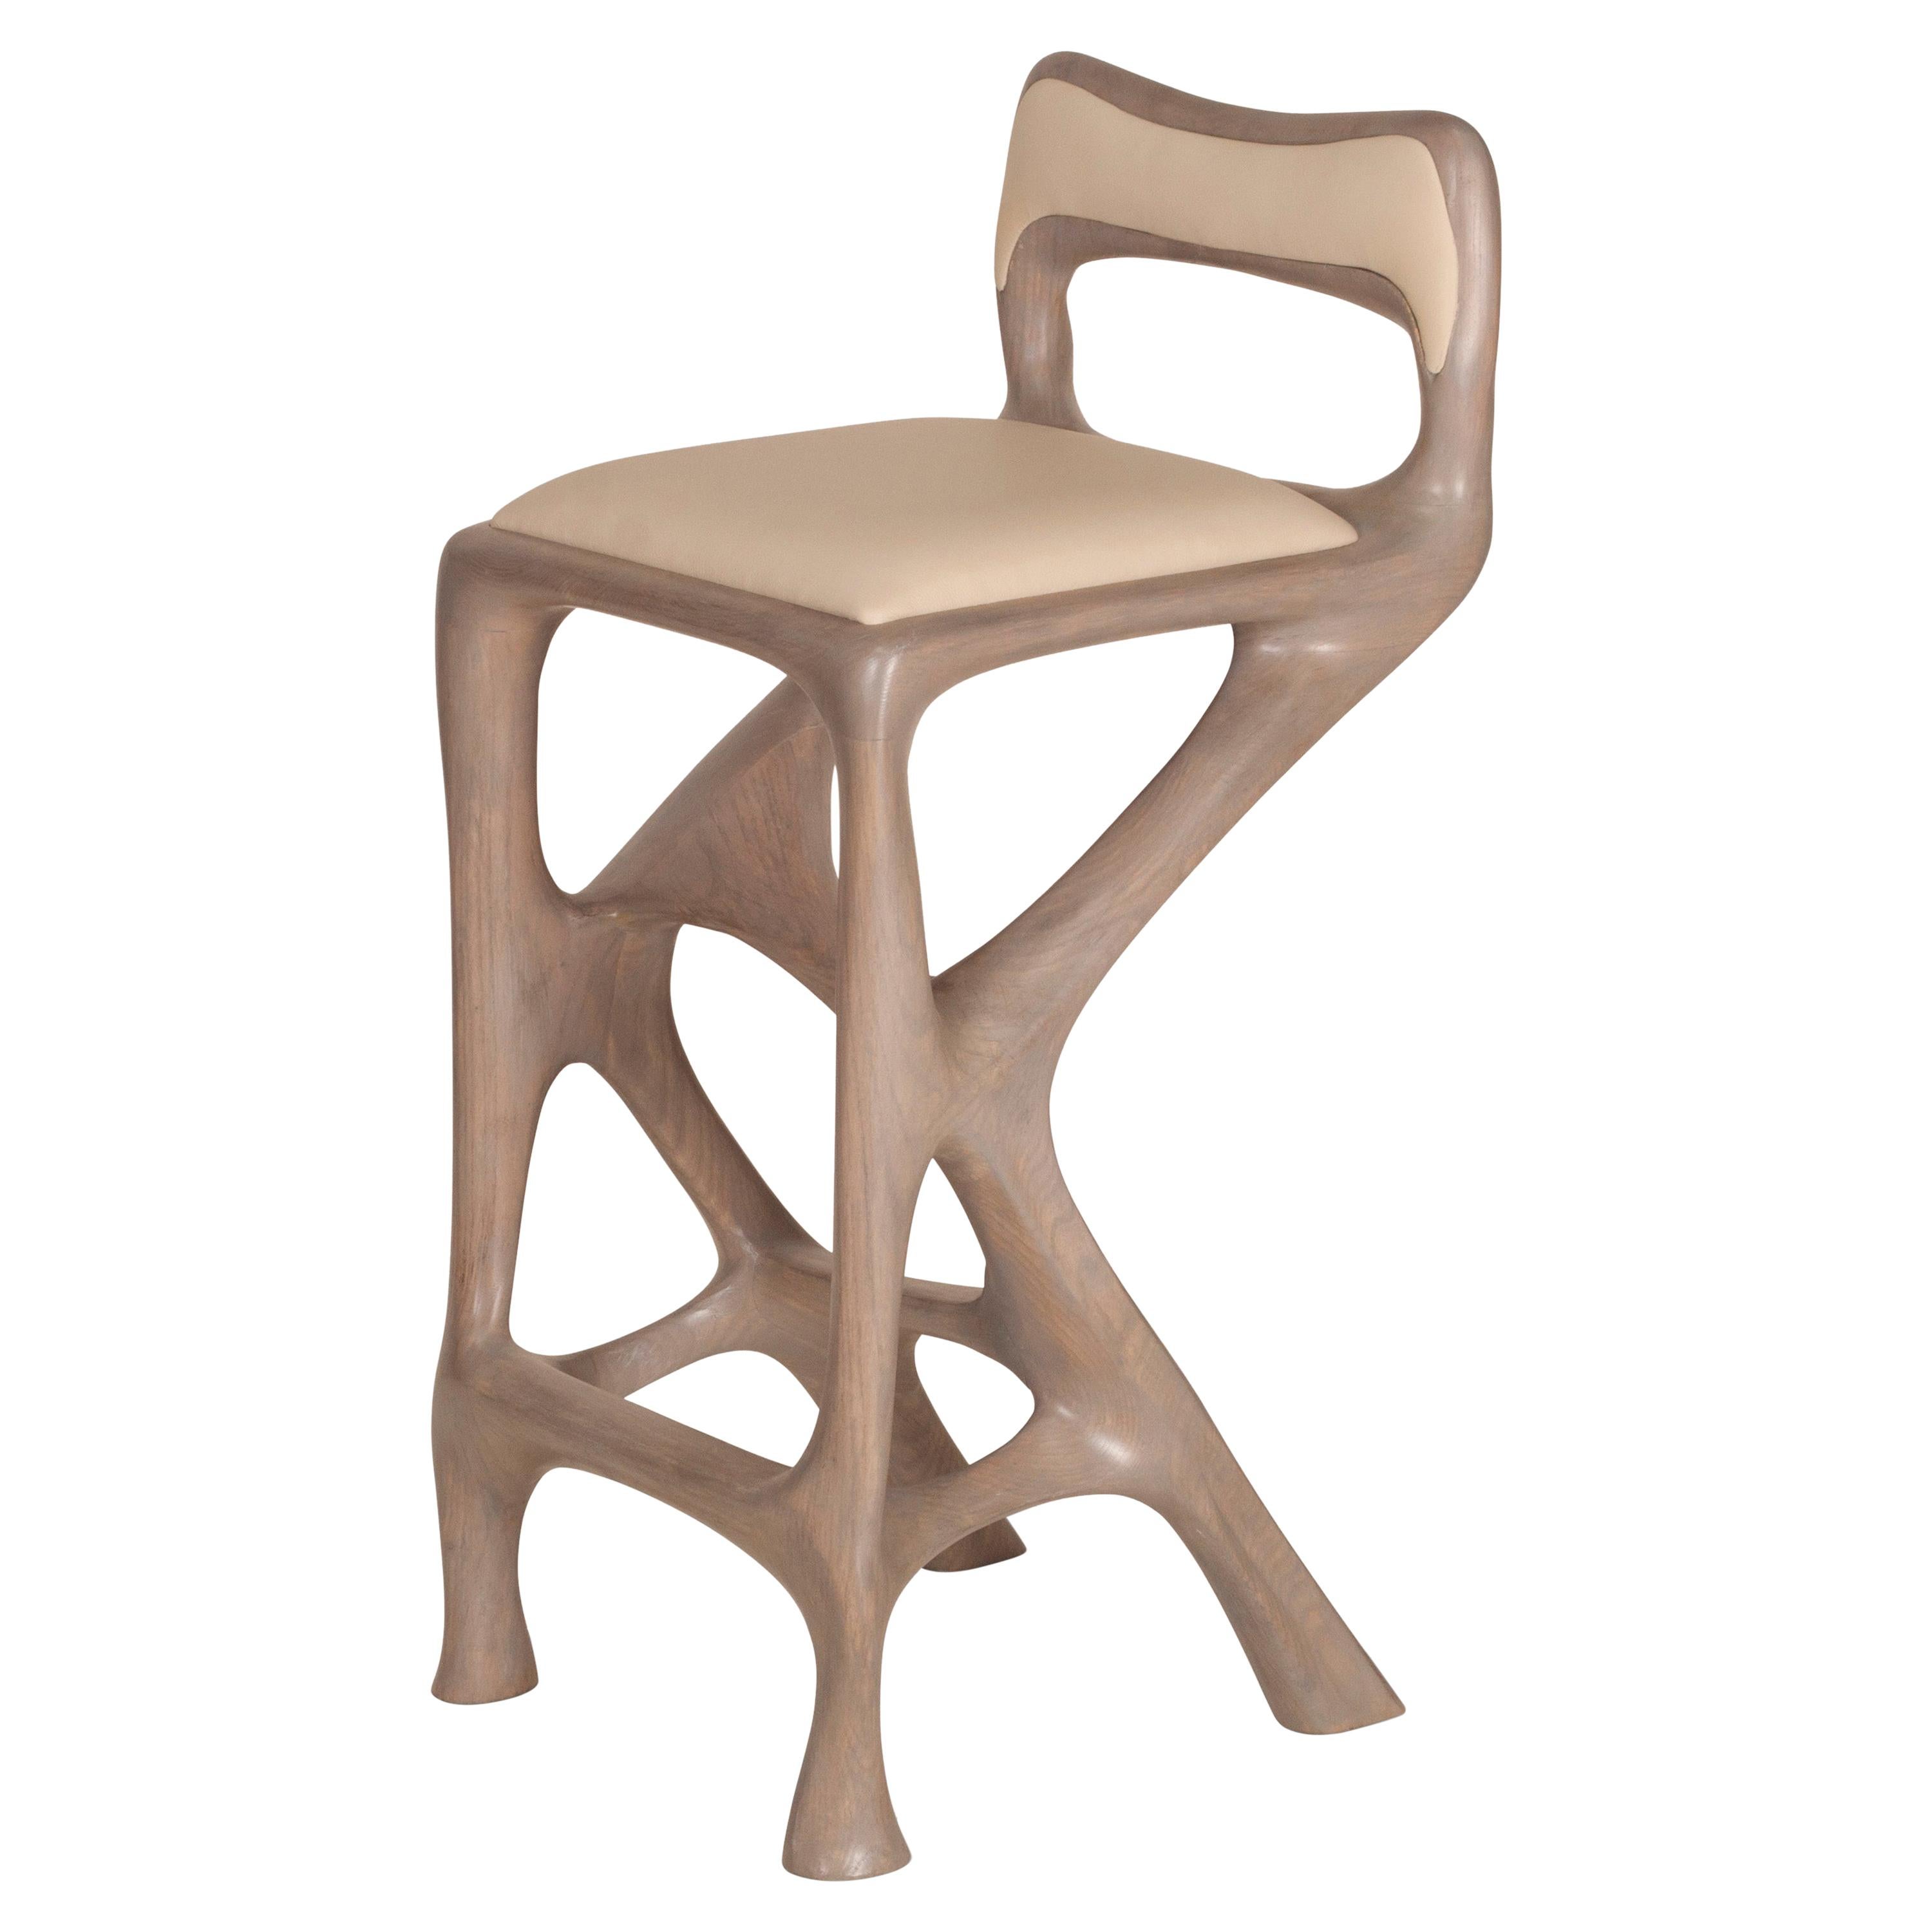 Amorph Chimera Bar Stool with Back in Gray Oak stain on Ash wood 